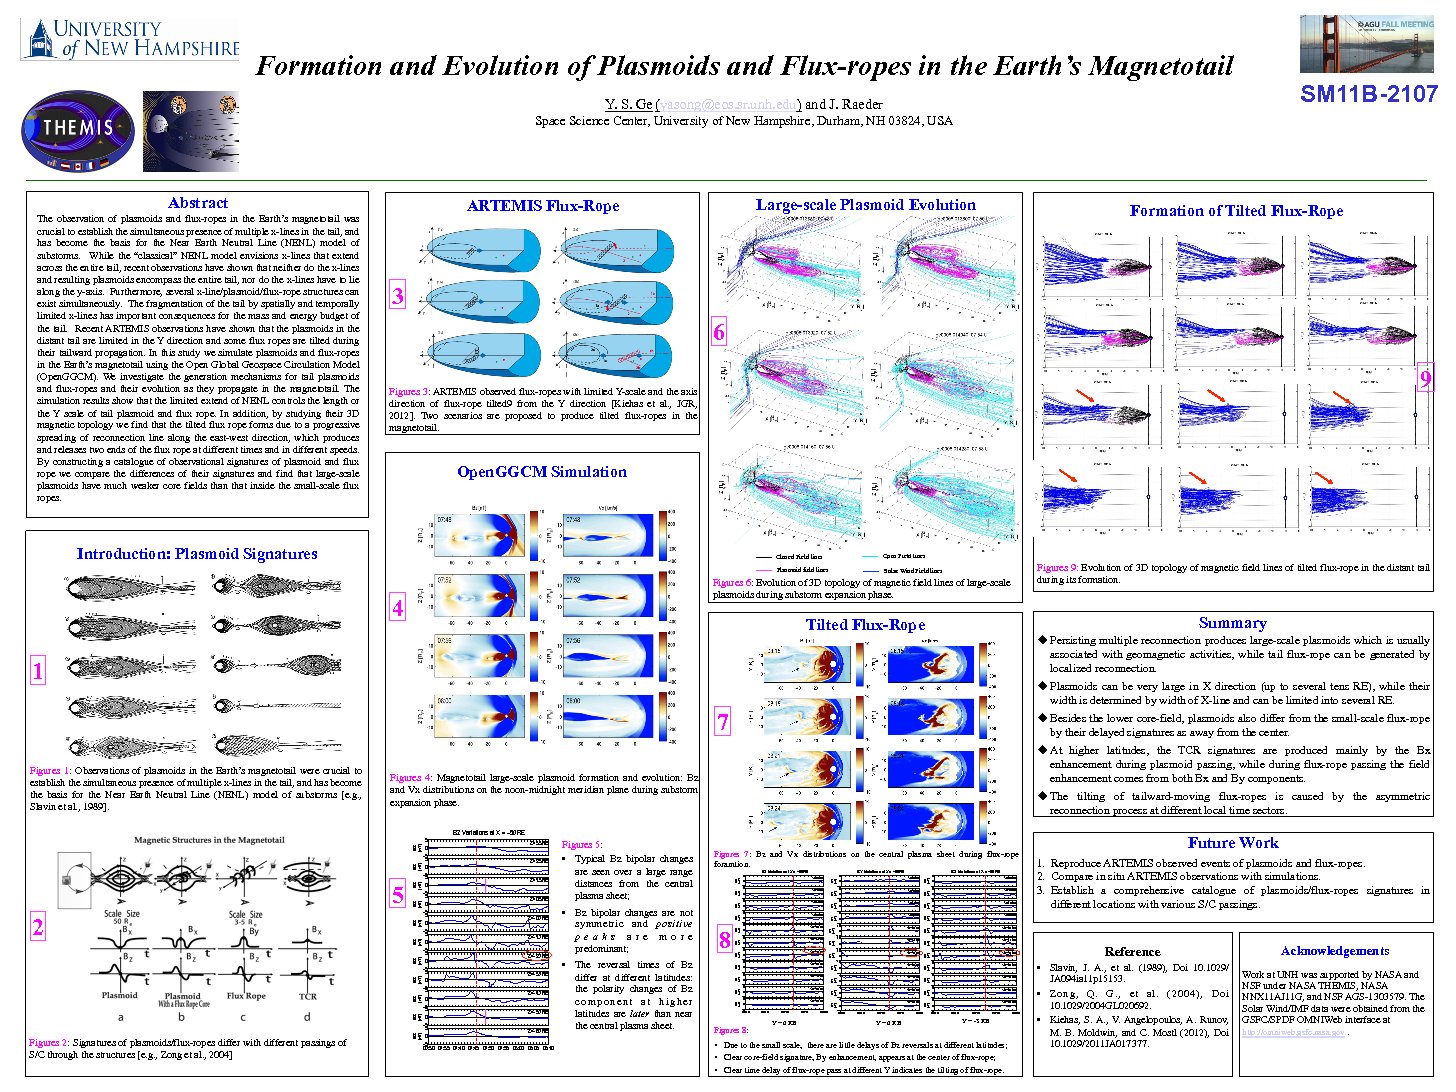 Formation And Evolution Of Plasmoids And Flux-Ropes In The Earth’S Magnetotail by yasong